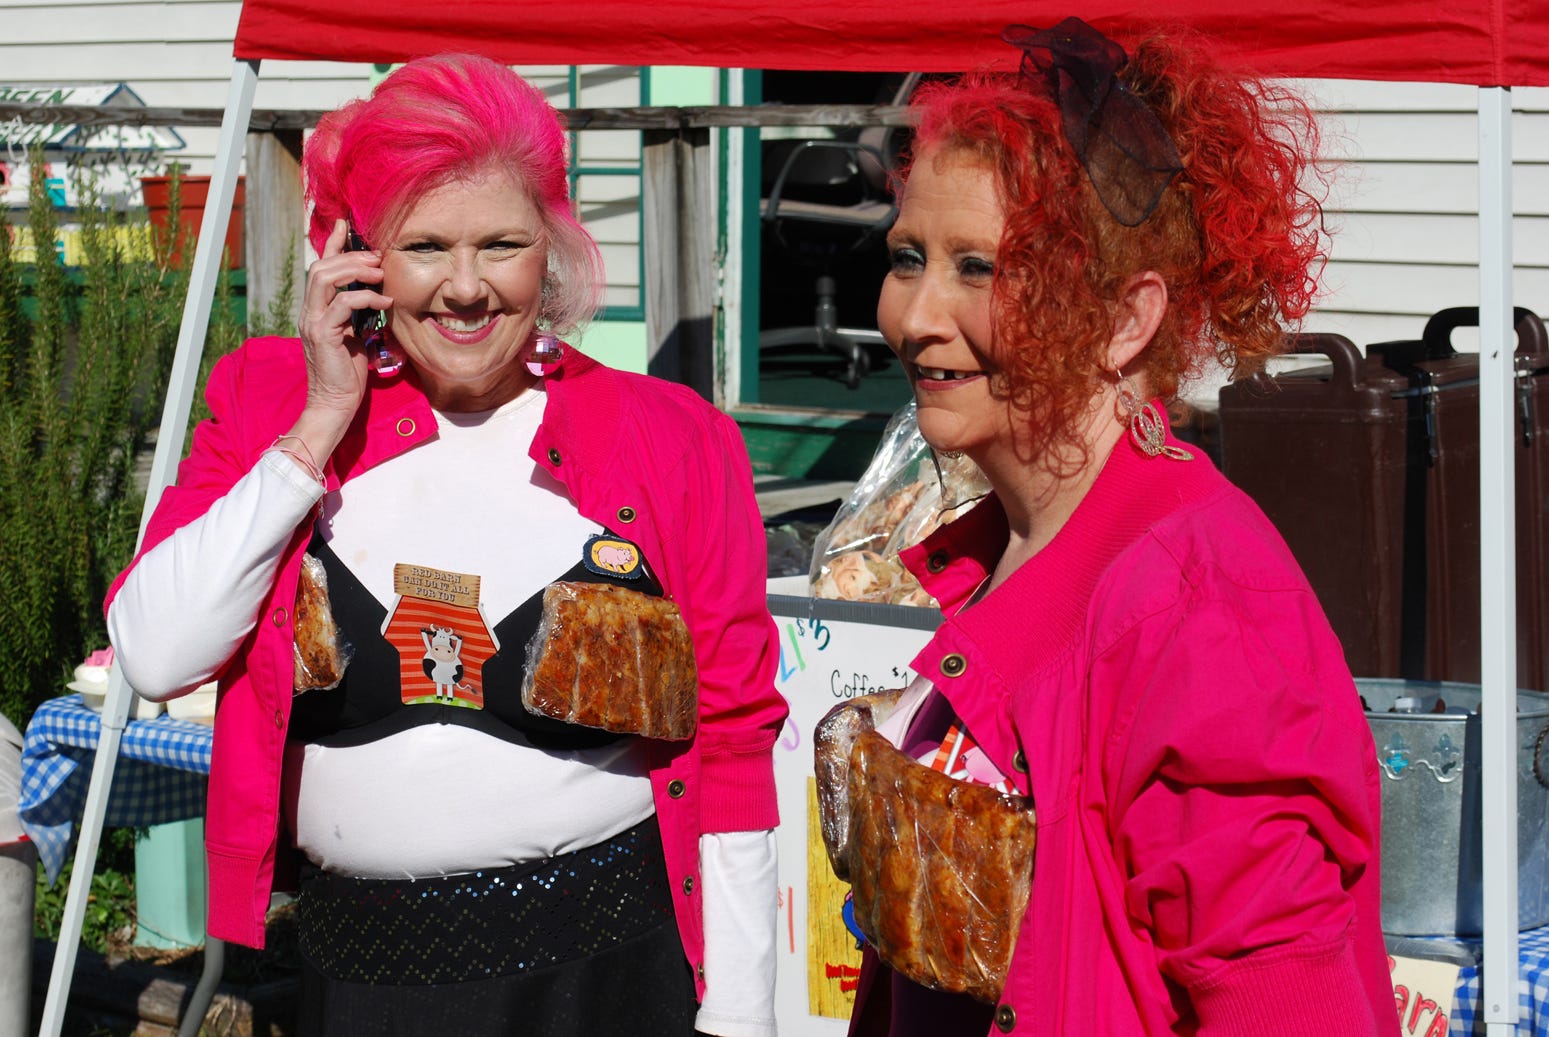 Cindy Brochu, left, and Robin Thomas from Red Barn Barbecue proved sometimes it’s ok to stare as they wore bras covered in a half rack of ribs.